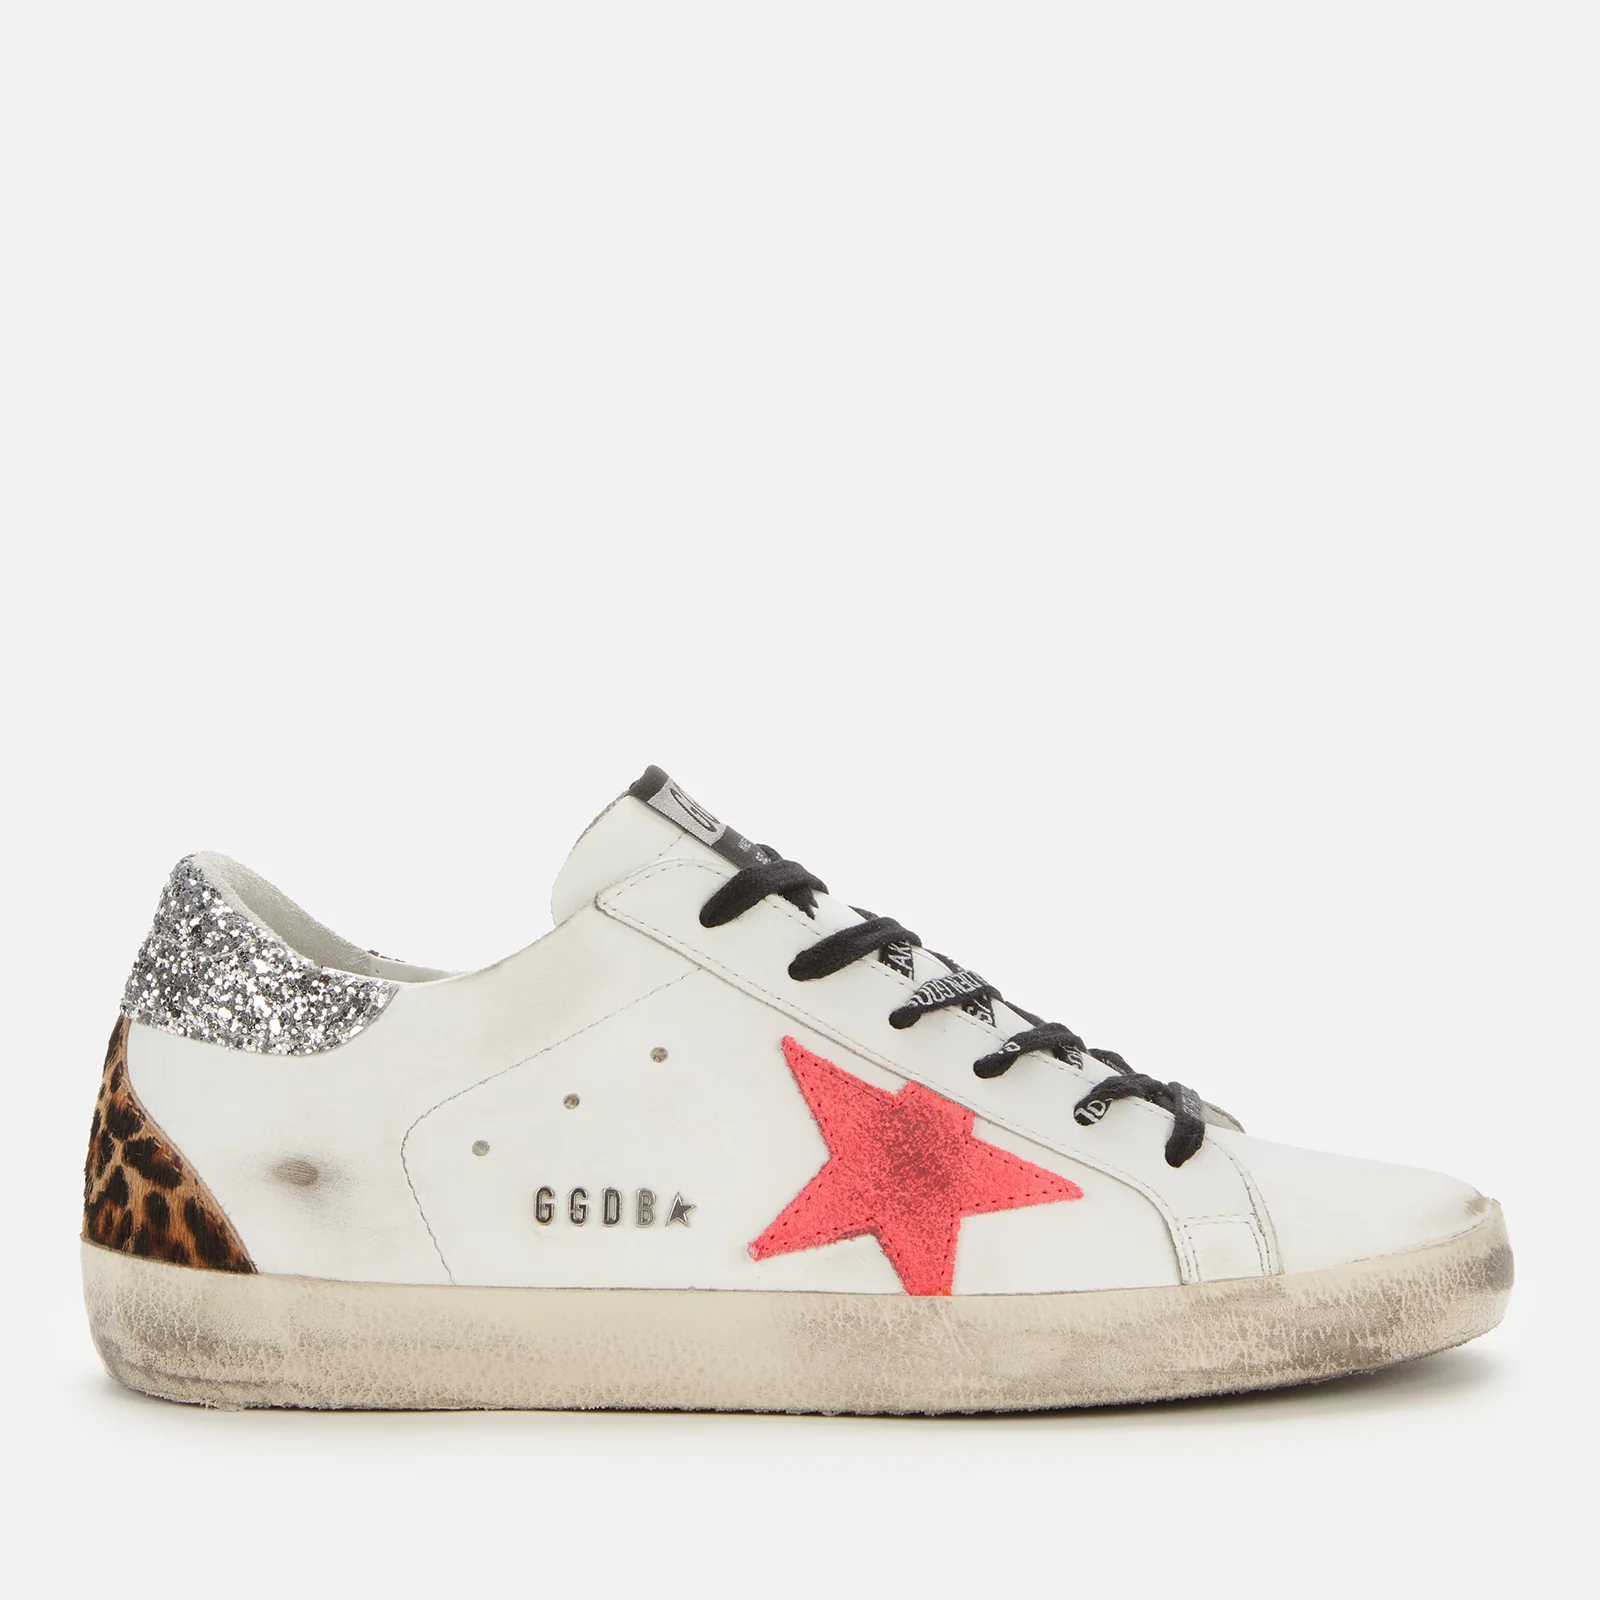 Golden Goose Women's Superstar Leather Trainers - White/Fuchsia/Silver Image 1